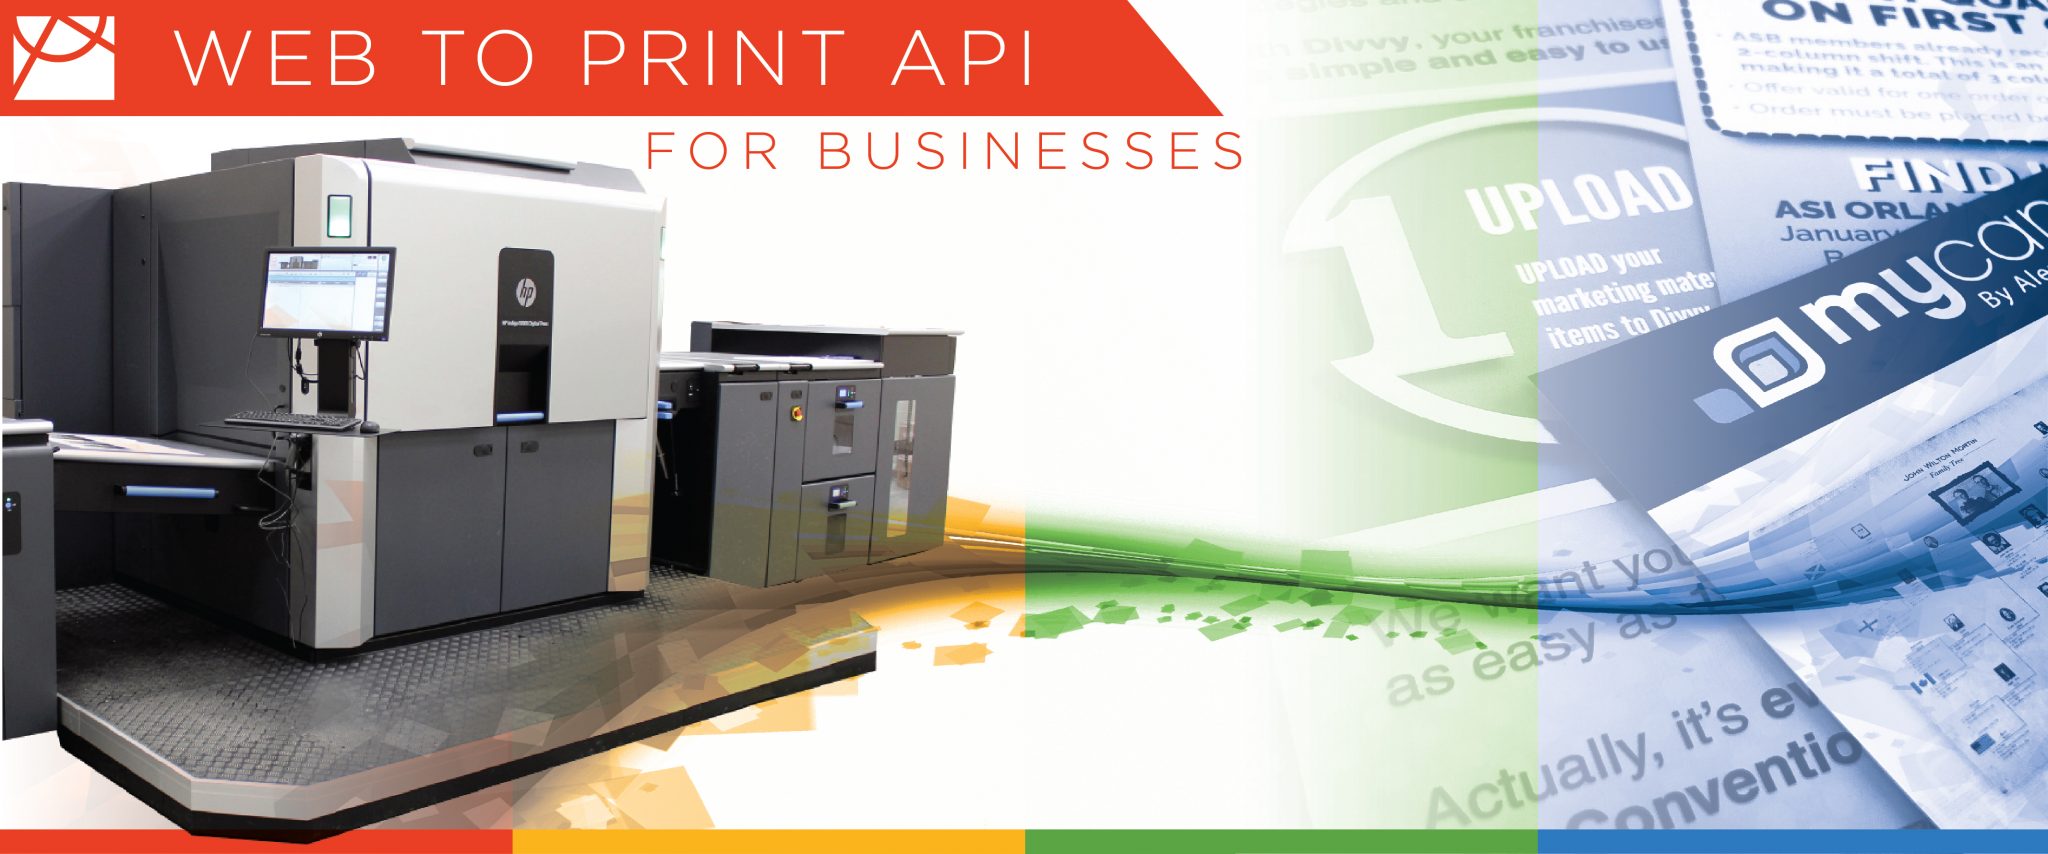 <h1>Web To Print API For Business</h1><p>Our Web to Print API For Business platforms offer many innovative and modern solutions for any type of business or group, whether large, small, or even franchises!</p>